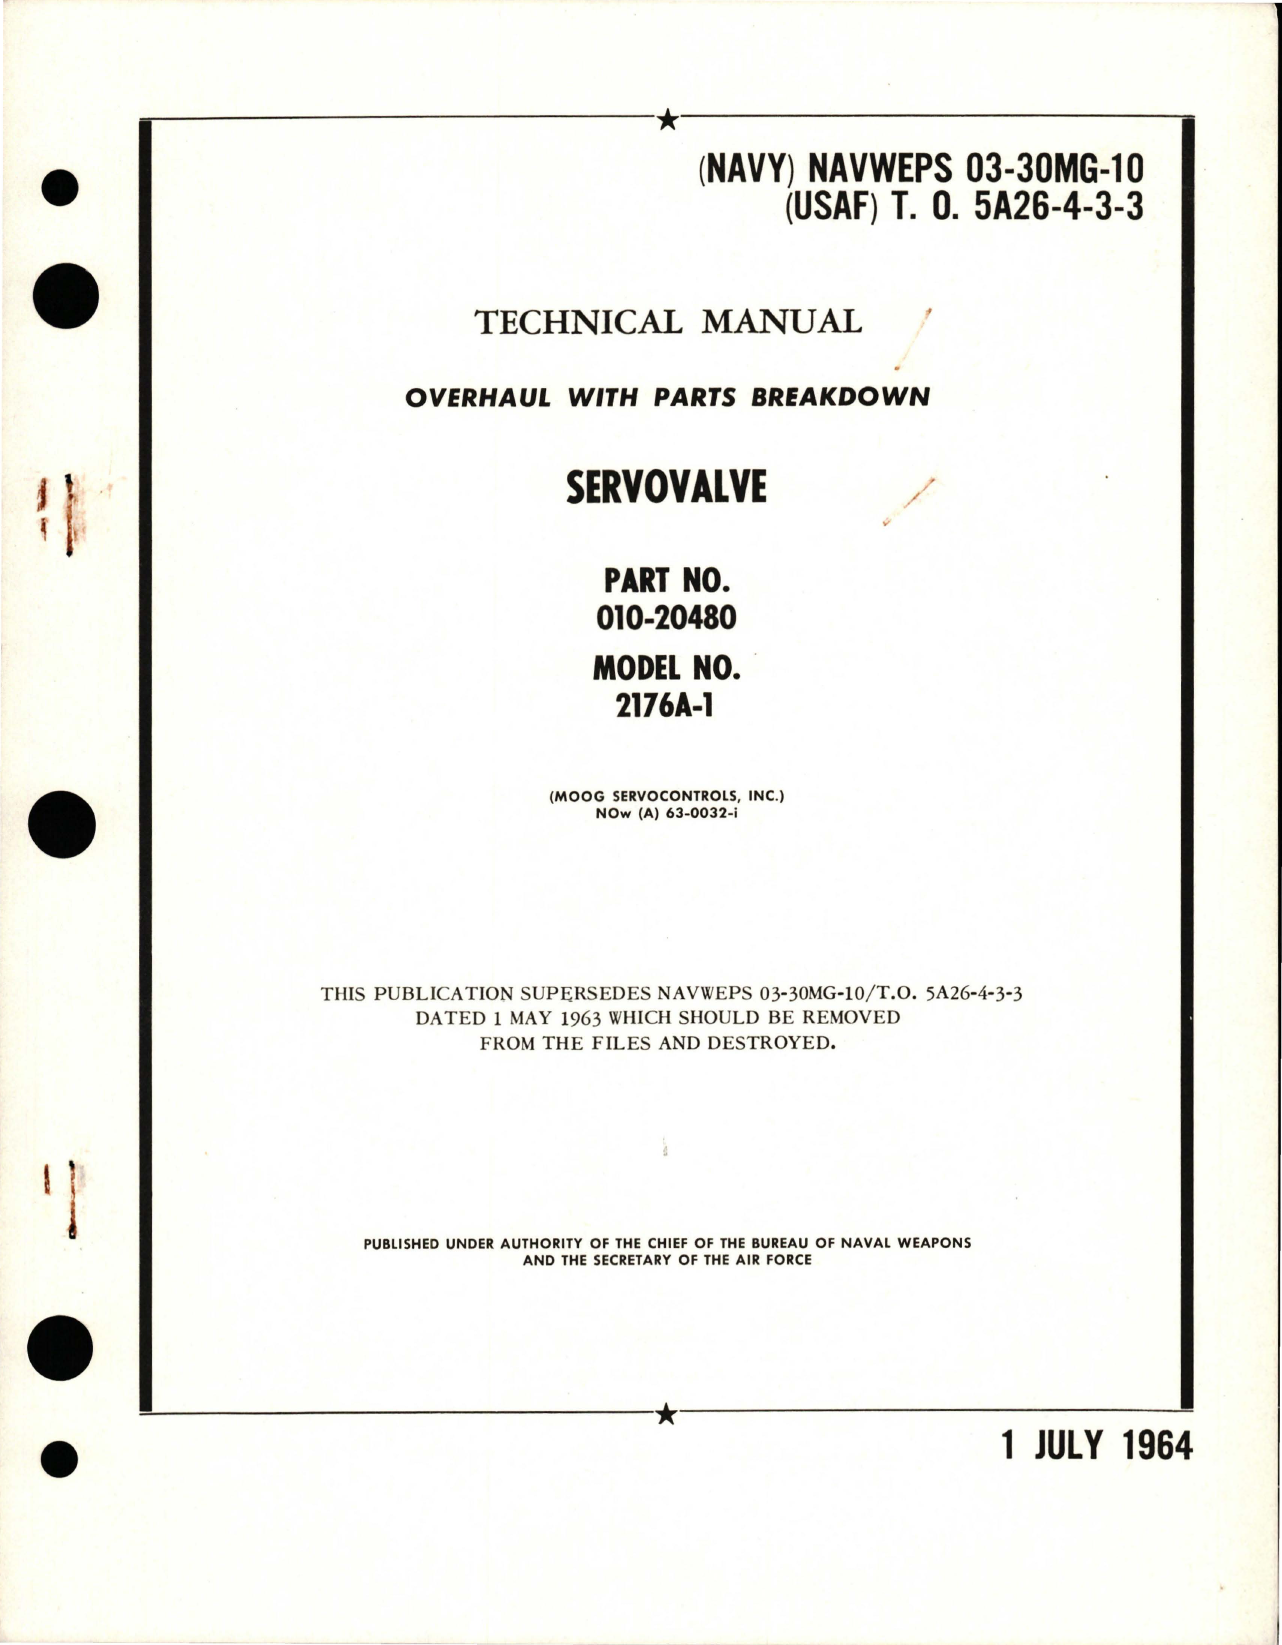 Sample page 1 from AirCorps Library document: Overhaul with Parts Breakdown for Servovalve - Part 010-20480 - Model 2176A-1